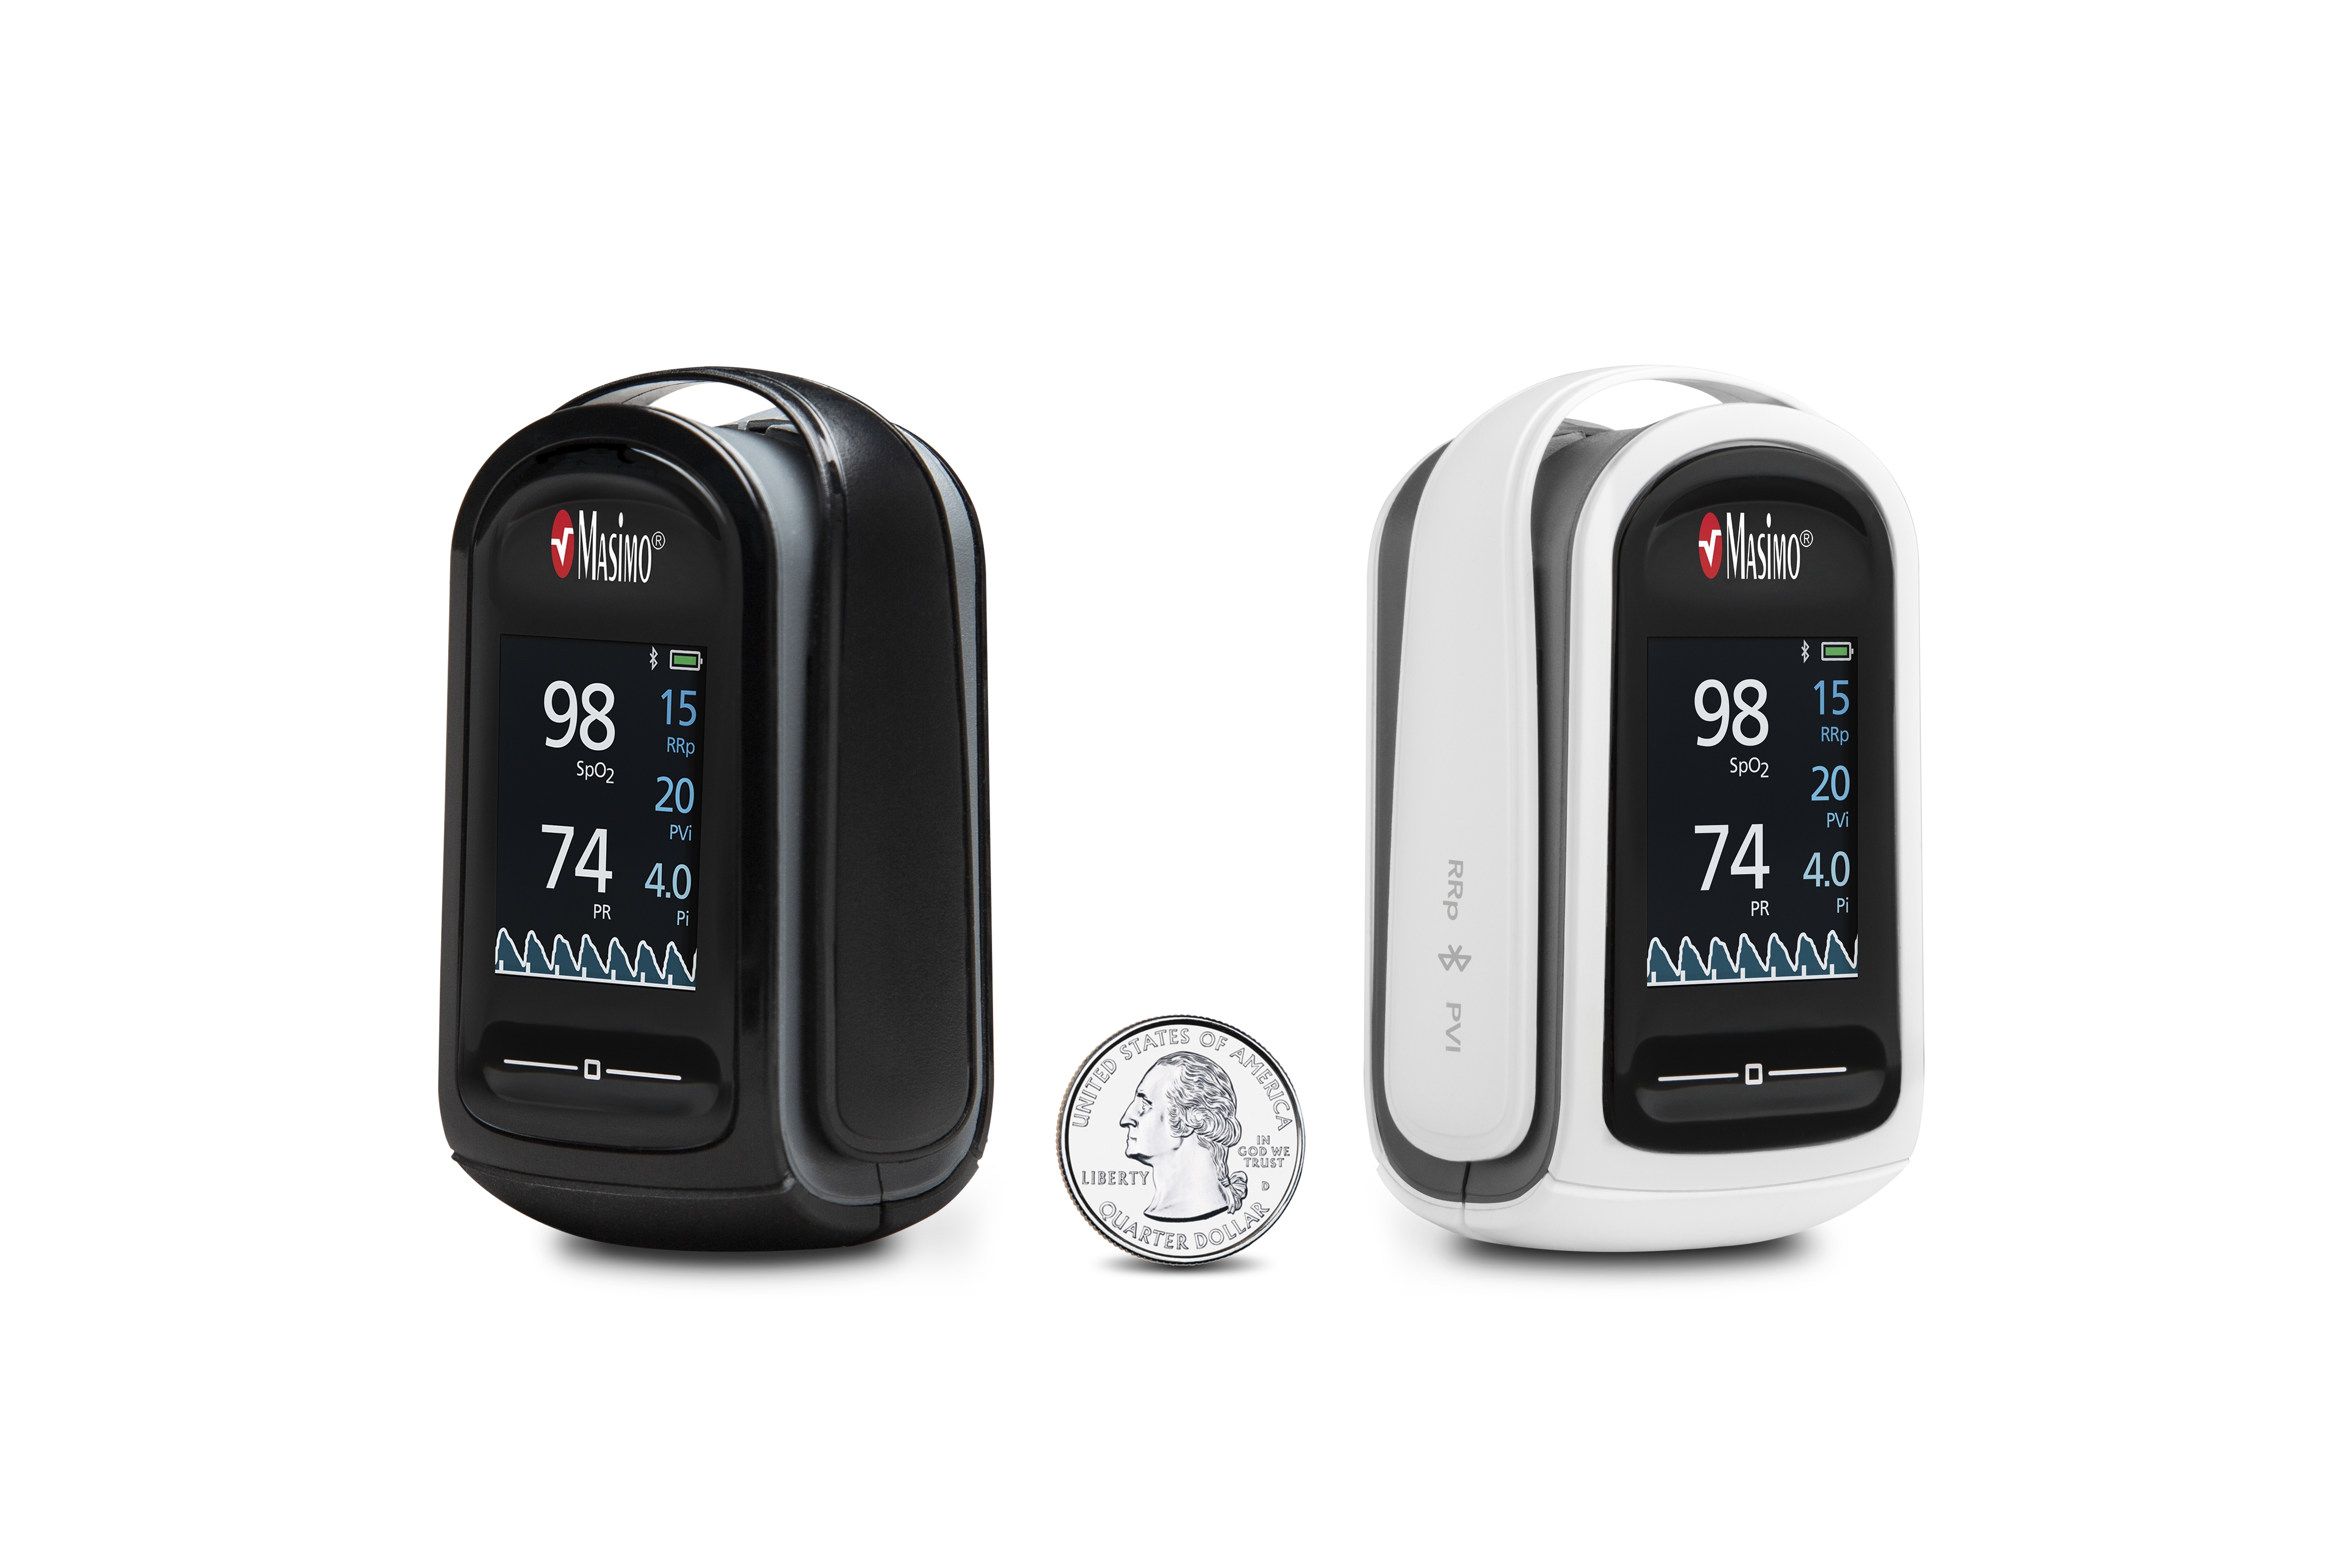 Masimo Announces Fda Clearance Of Rrp Respiration Rate From The Pleth On The Mightysat Rx Spot Check Fingertip Pulse Oximeter Business Wire